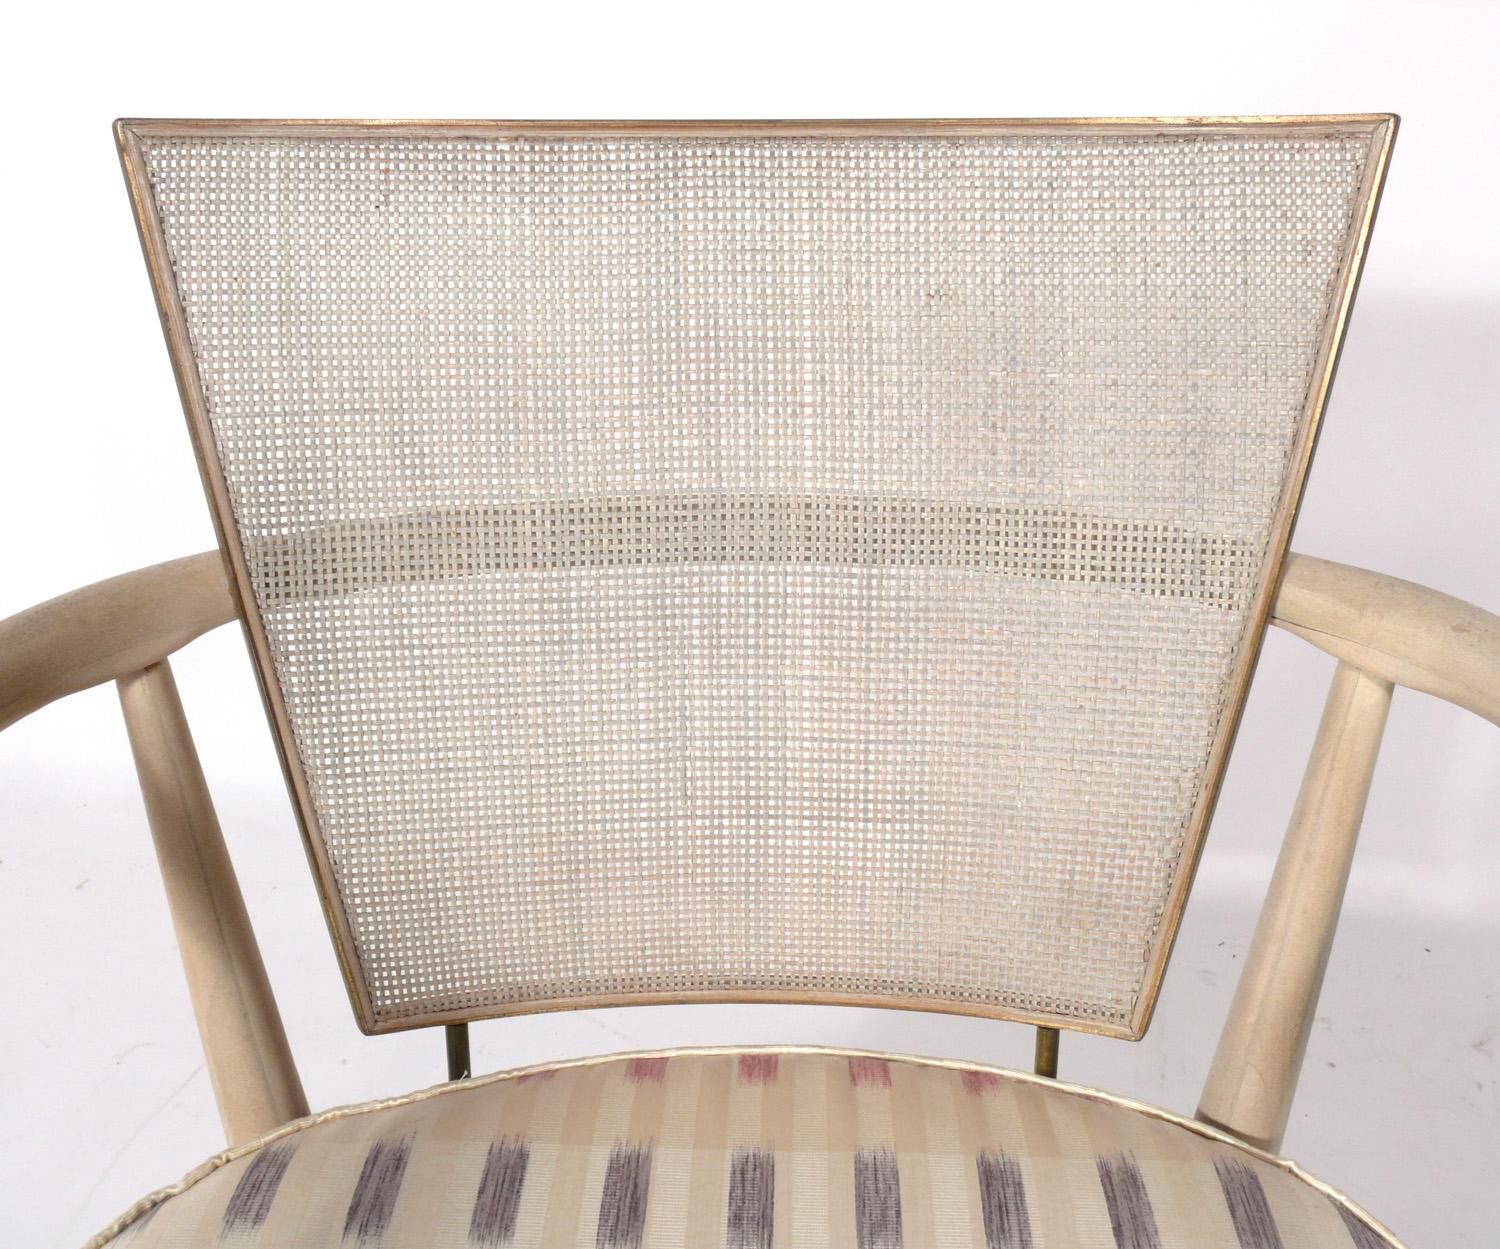 Bert England Caned Back Lime Washed Wood Lounge Chairs In Good Condition For Sale In Atlanta, GA